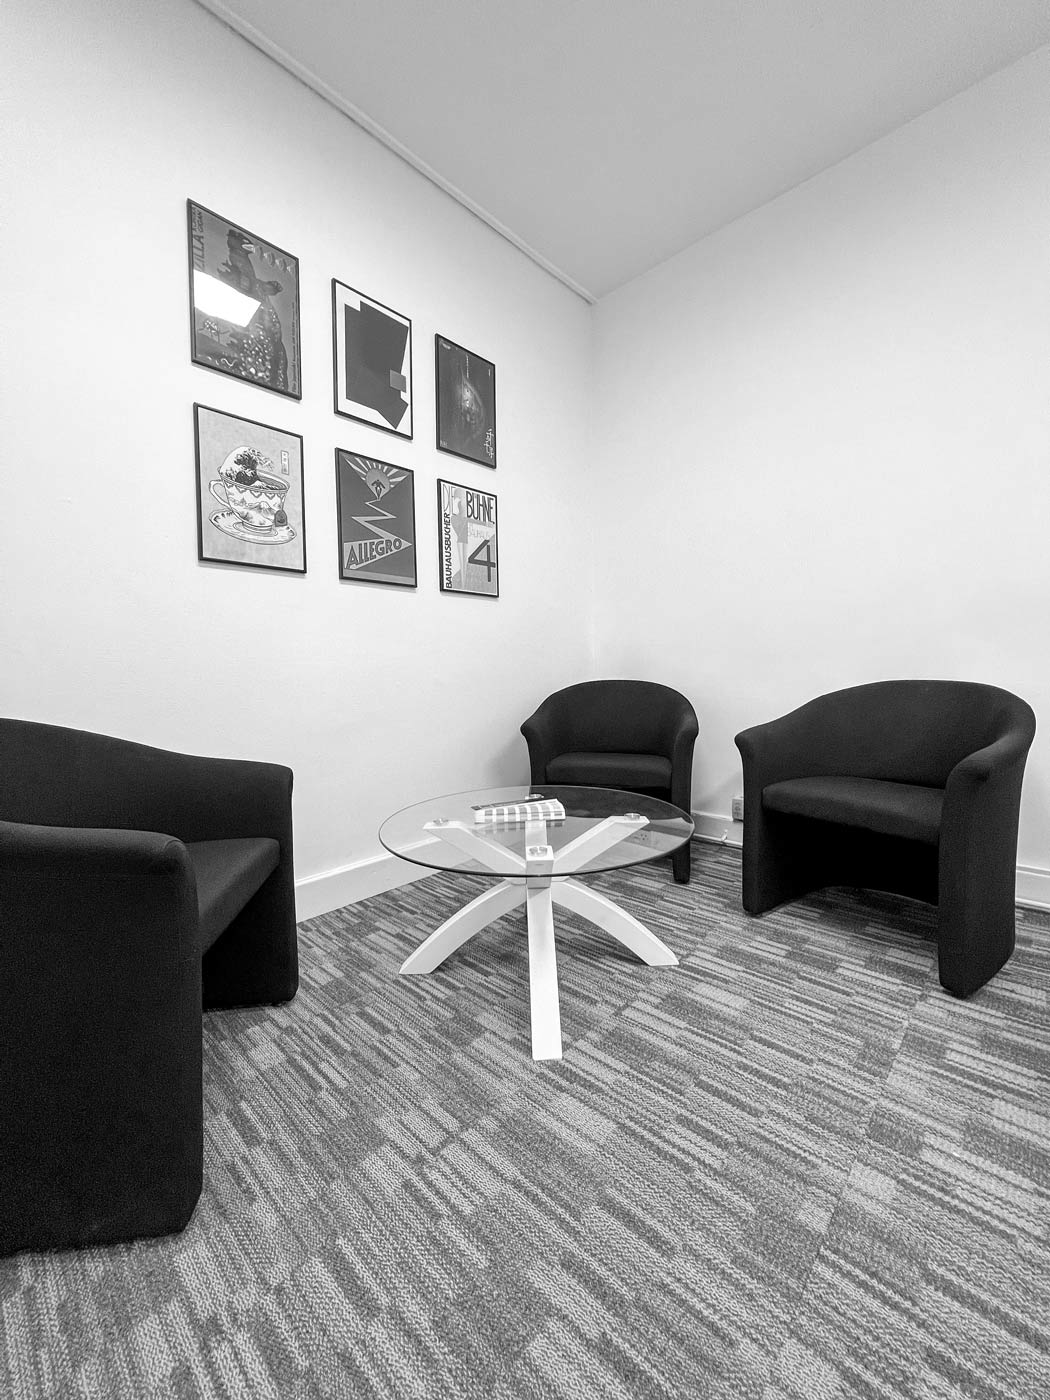 A photo of the CoreMorph studio showing the meeting area